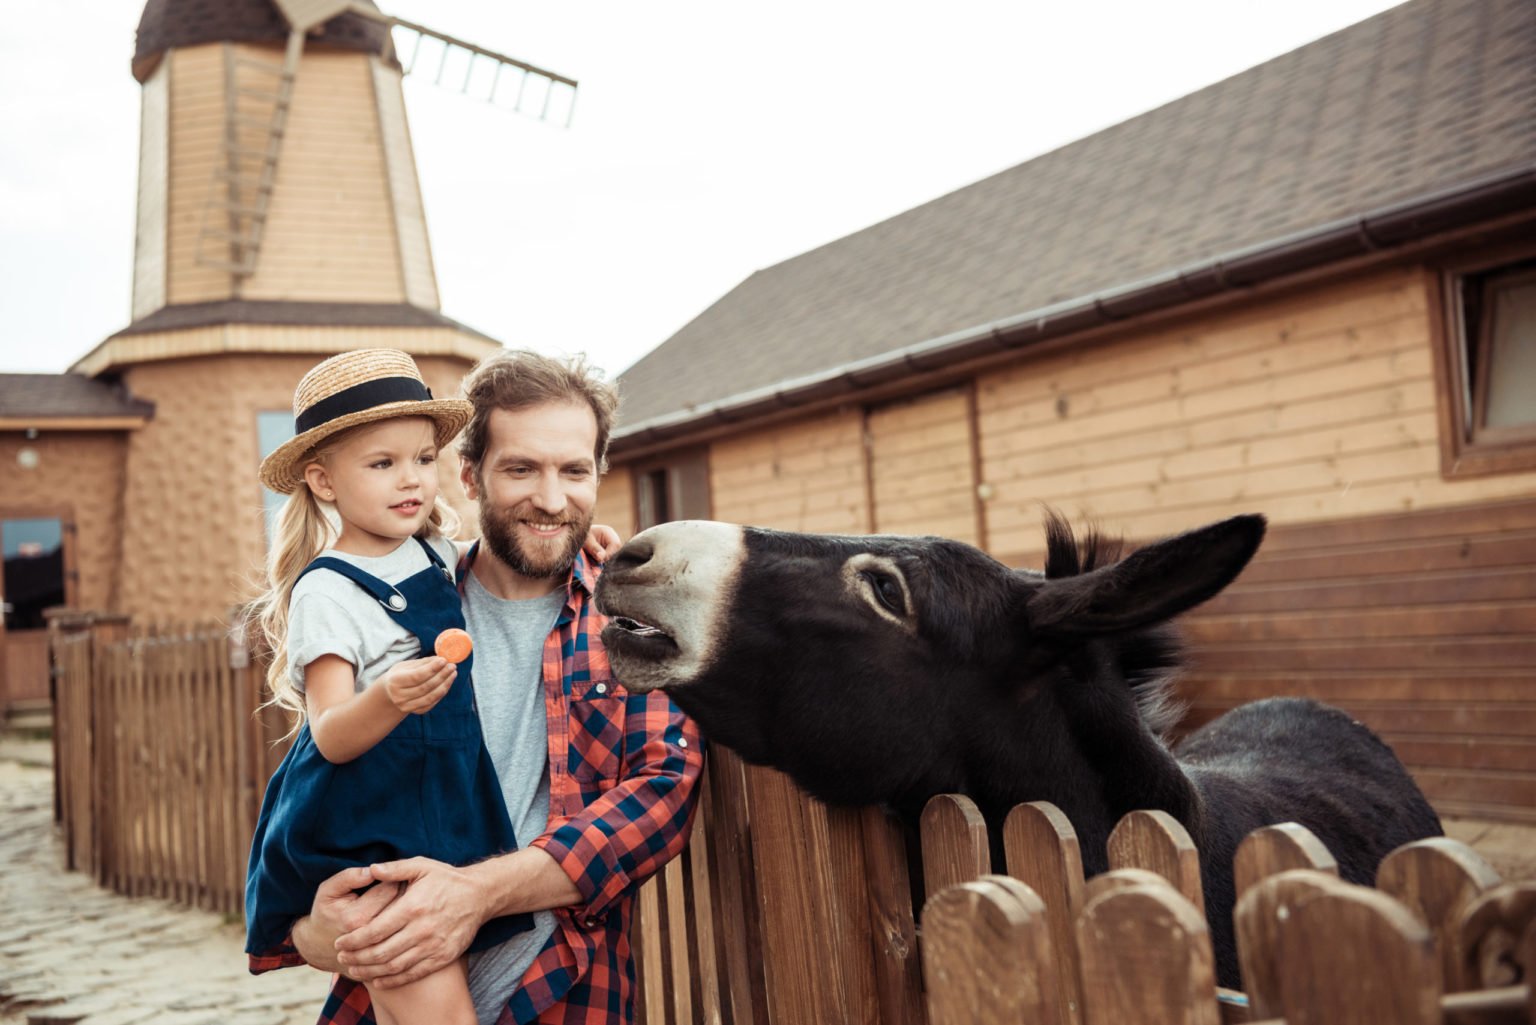 a person and a child holding a baby next to a horse